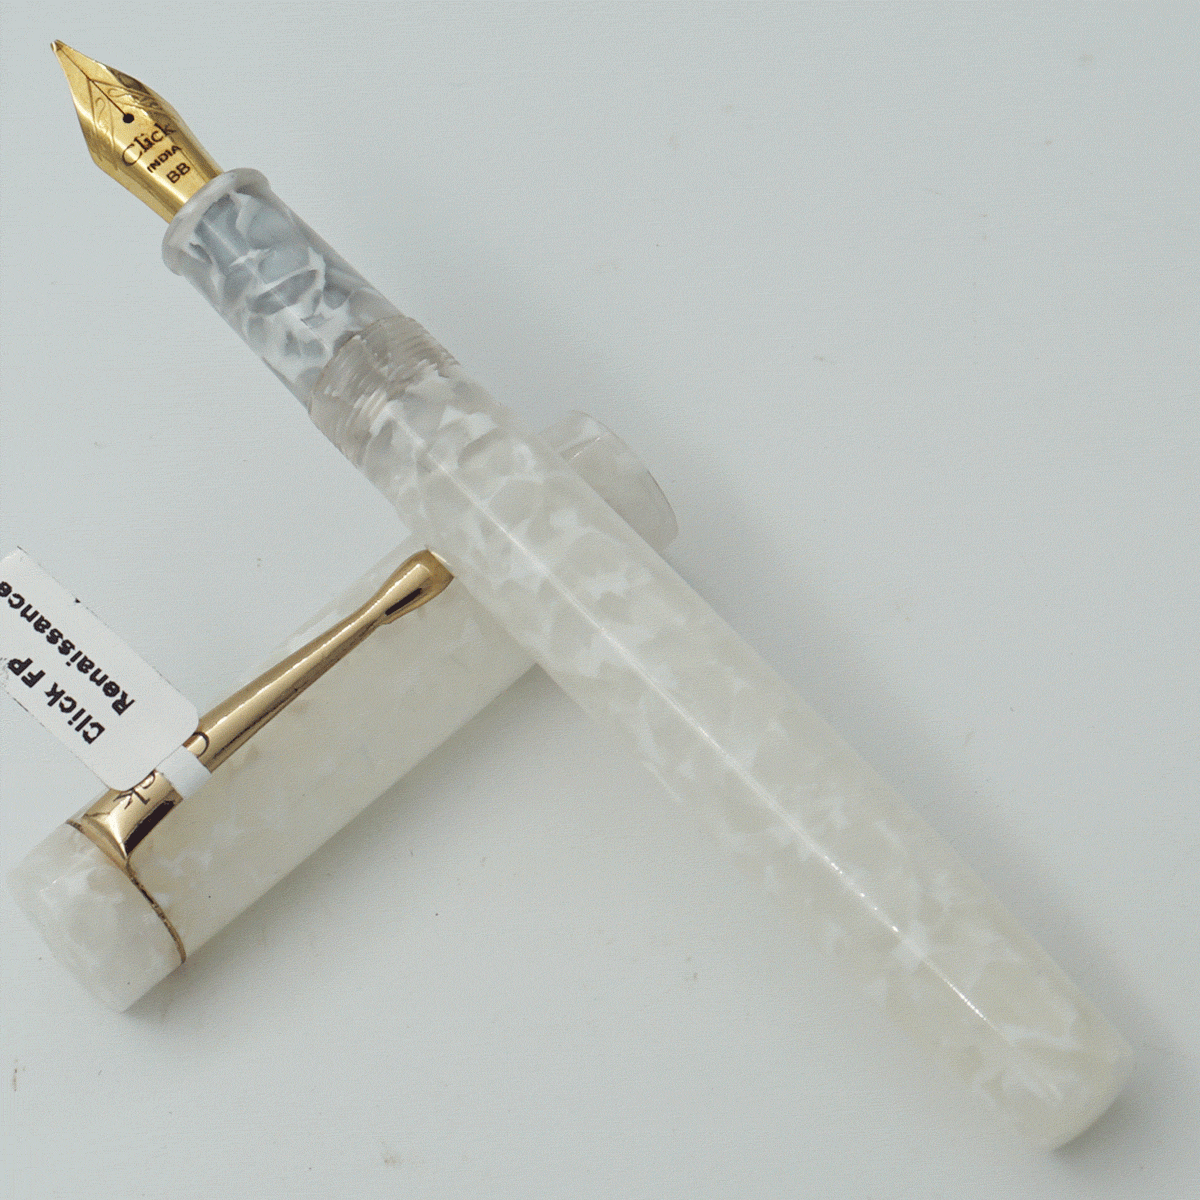 Click Renaissance White Color Acrylic Body With Golden Clip No 35 BB Double Broad Nib Eye Dropper Model Fountain (3 in 1) (Nib Can be Customised) SKU 24033